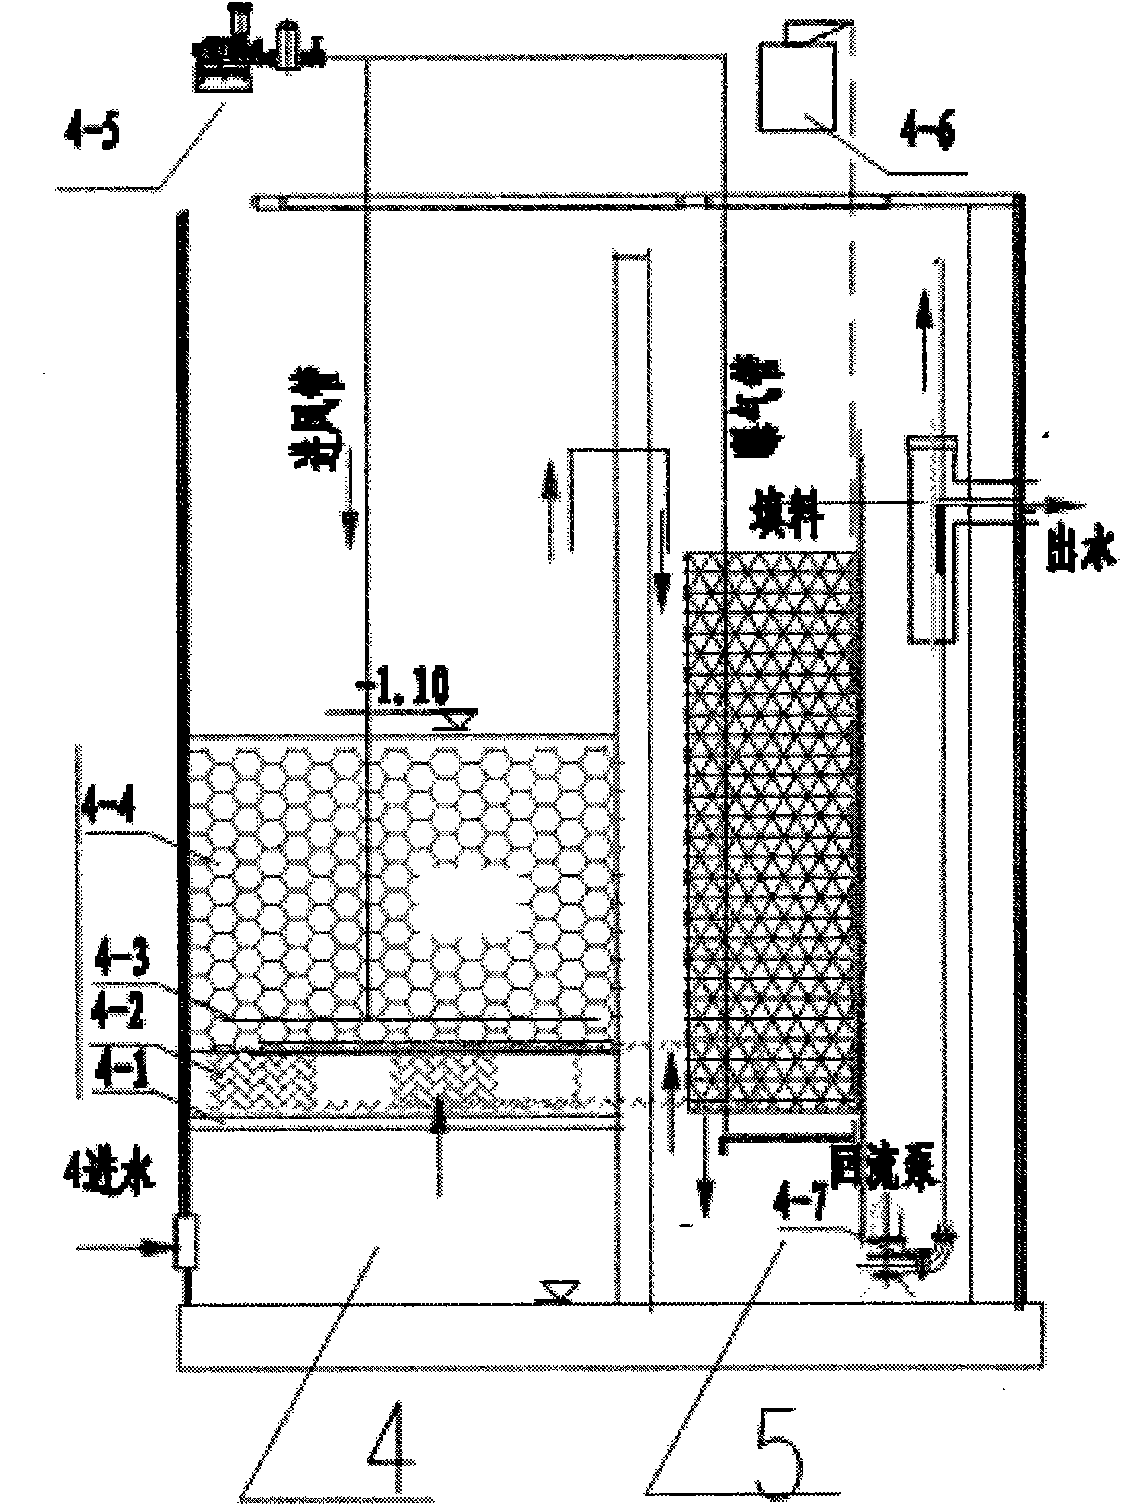 Method for treating rural sewage with effect of removing phosphate and nitrogen